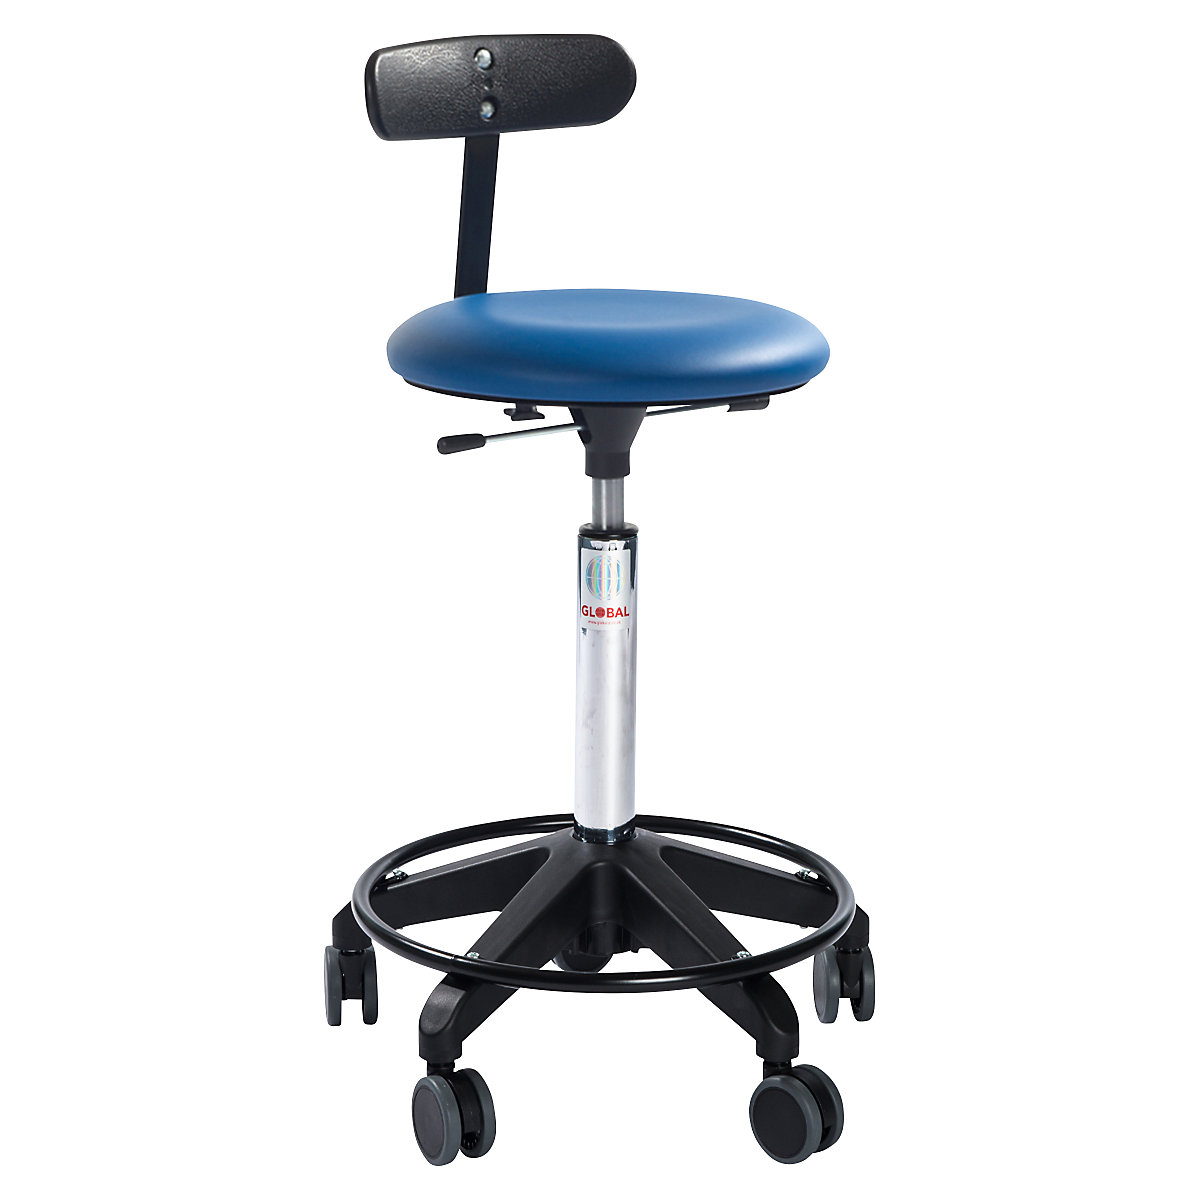 Industrial stool, height adjustable, with castors and back rest, blue, height 450 – 580 mm-4